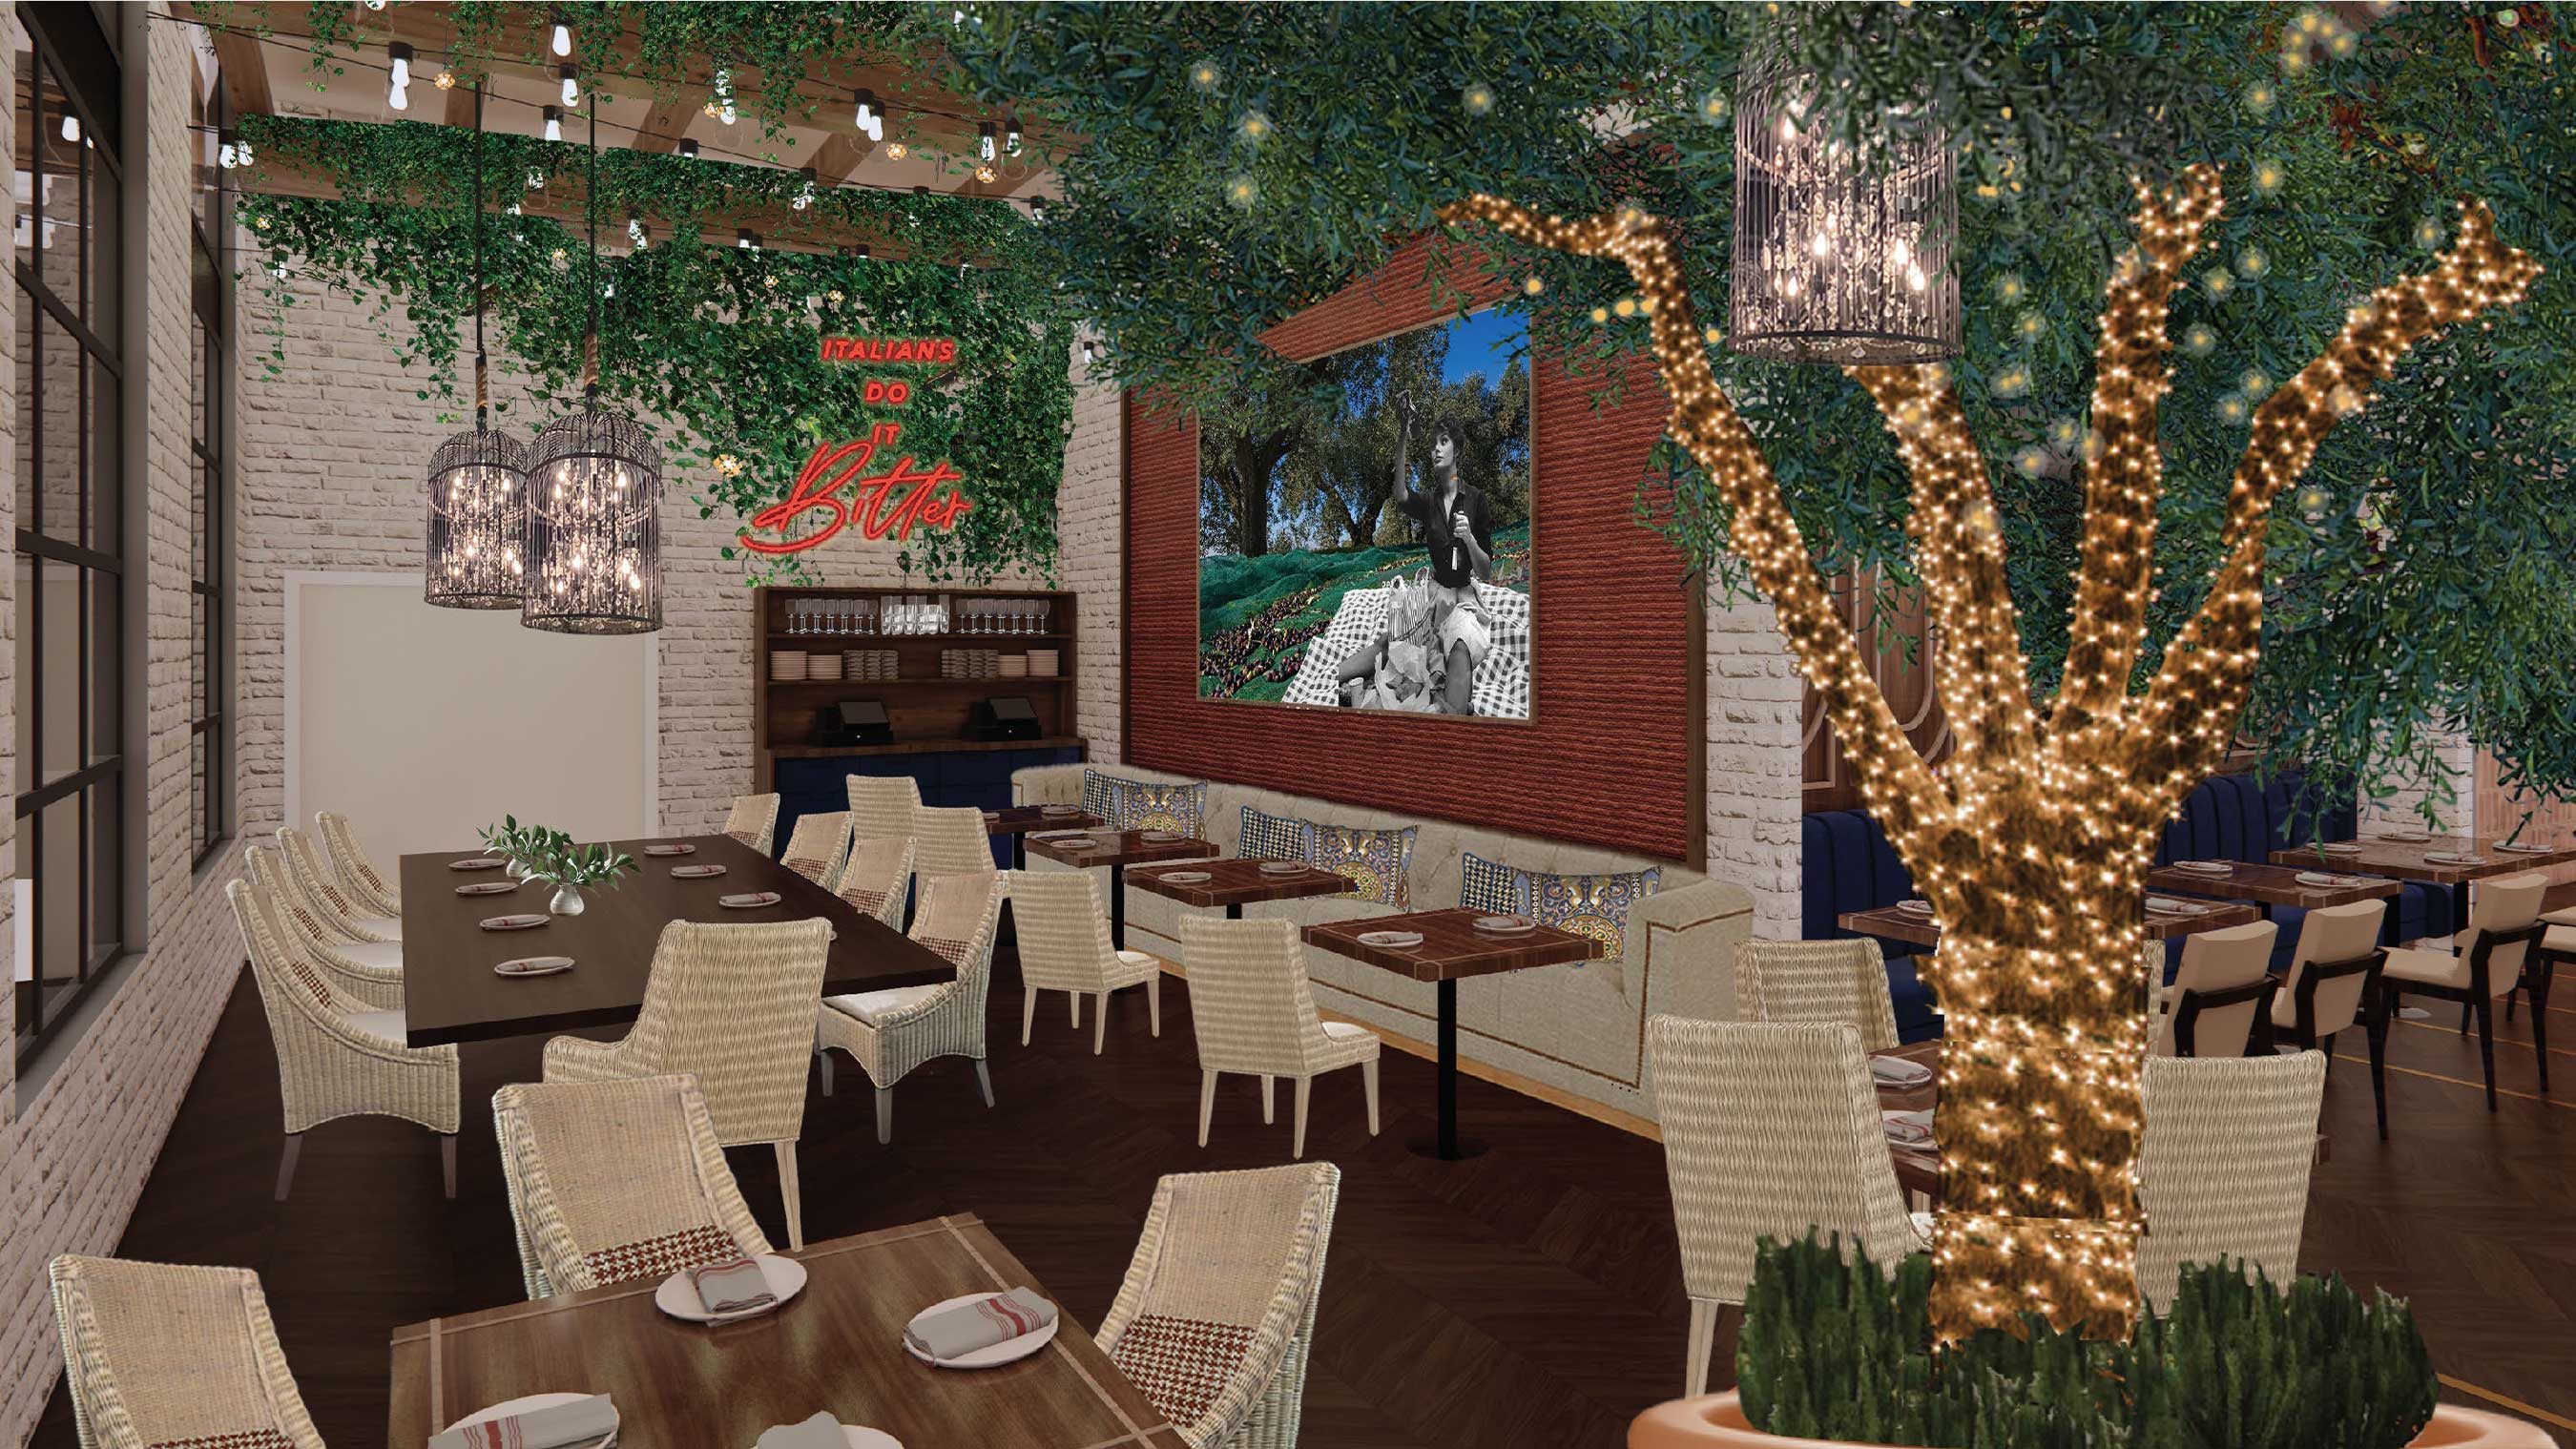 Rendering of Ballo, a new Italian dining concept from Chef Shawn McClain opening at SAHARA Las Vegas late 2021